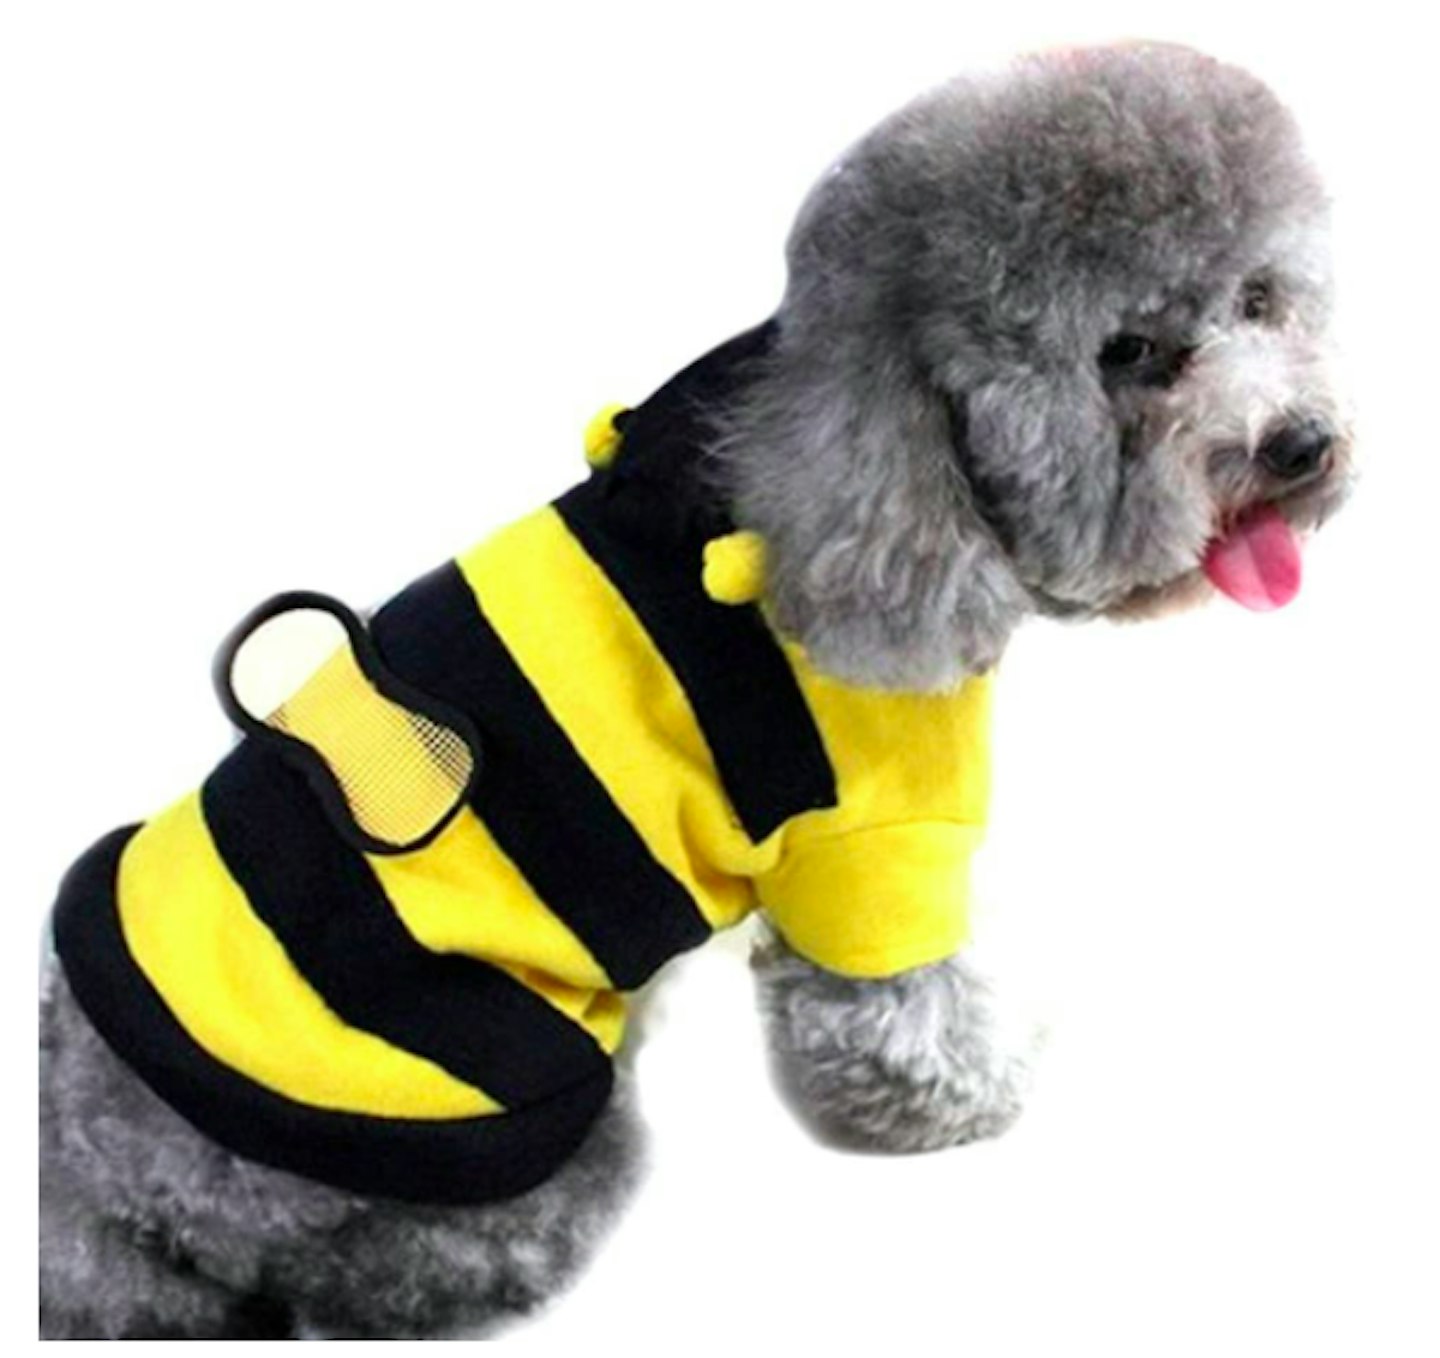 Dog bumblebee outfit